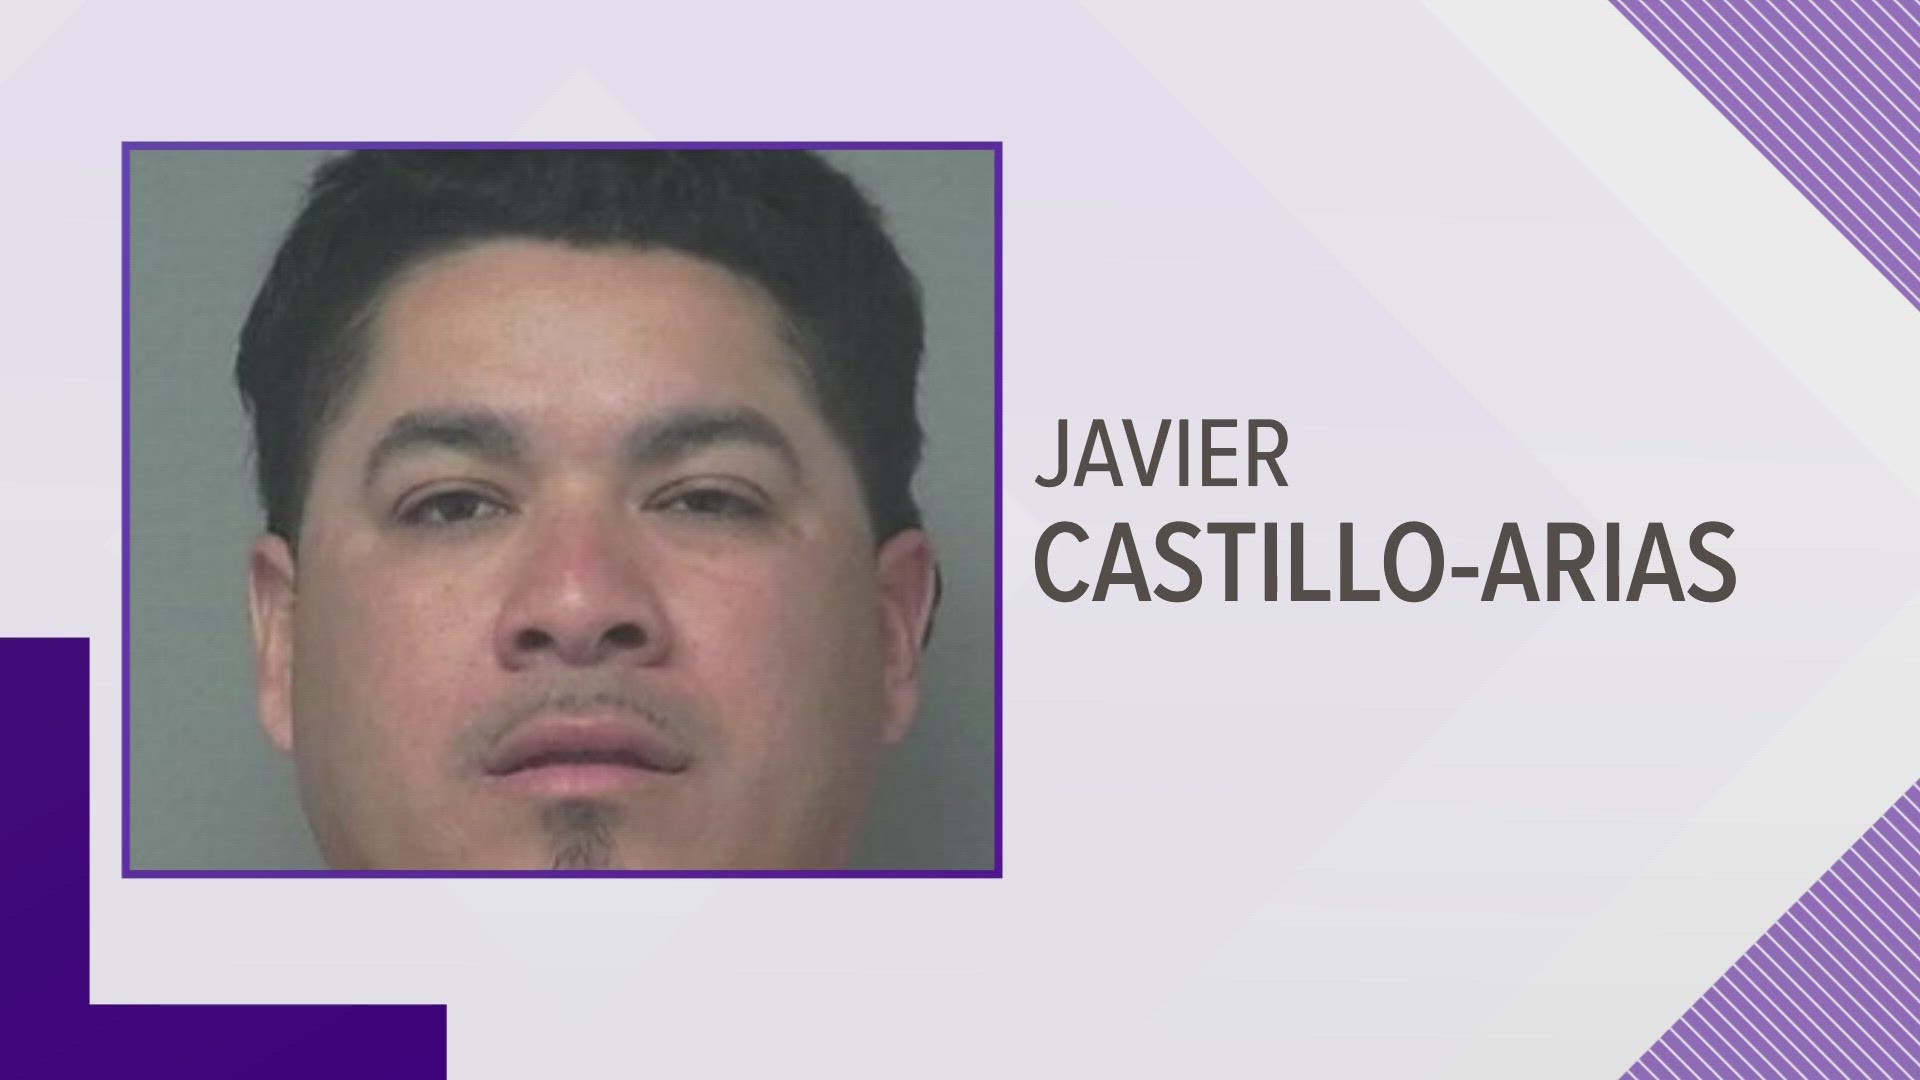 Javier Castillo-Arias was arrested and booked into the Potter County Jail Tuesday.